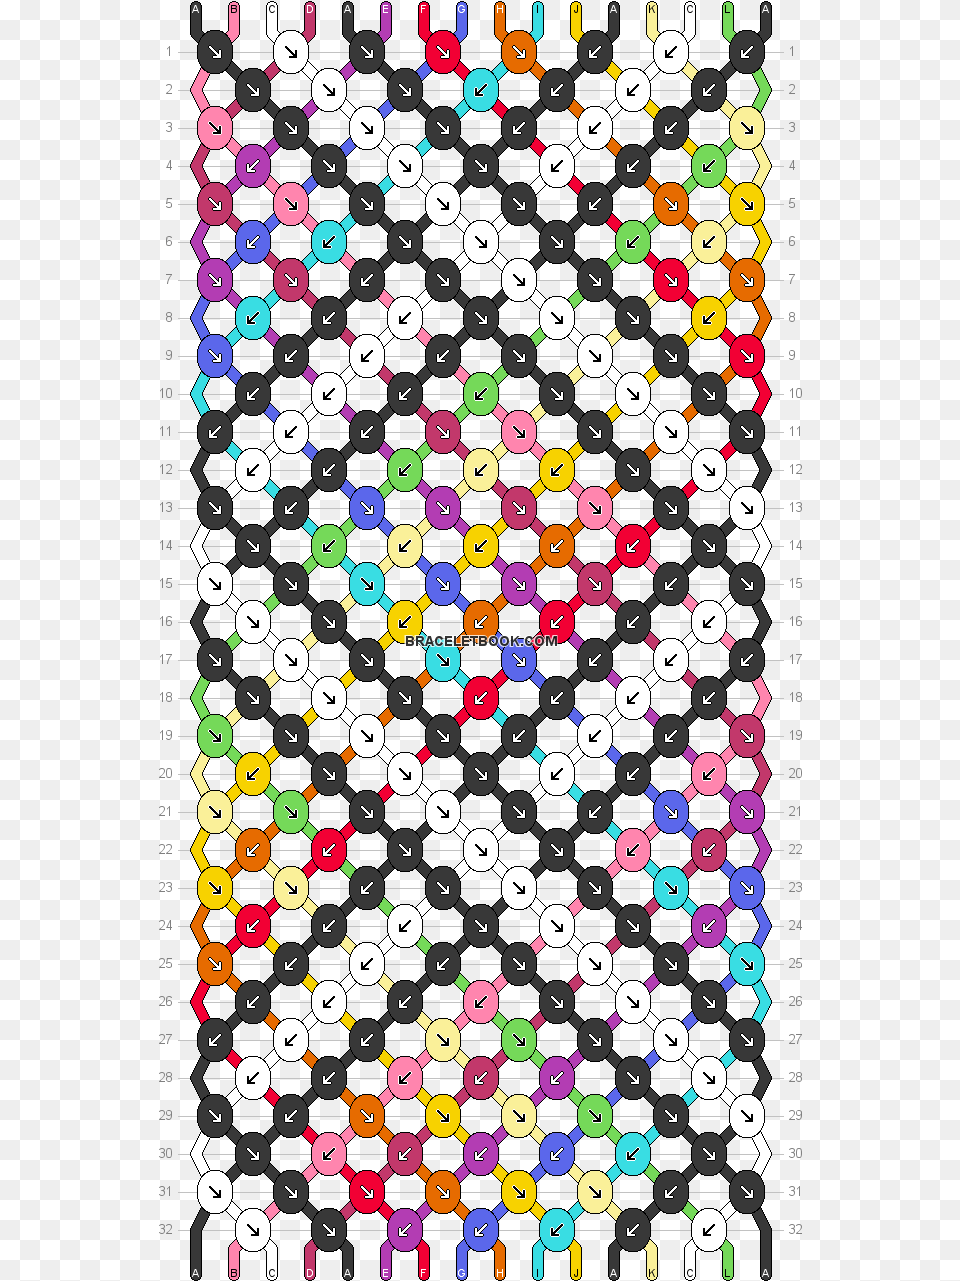 Normal Pattern Friendship Bracelets Patterns, Home Decor, Chess, Game Free Png Download